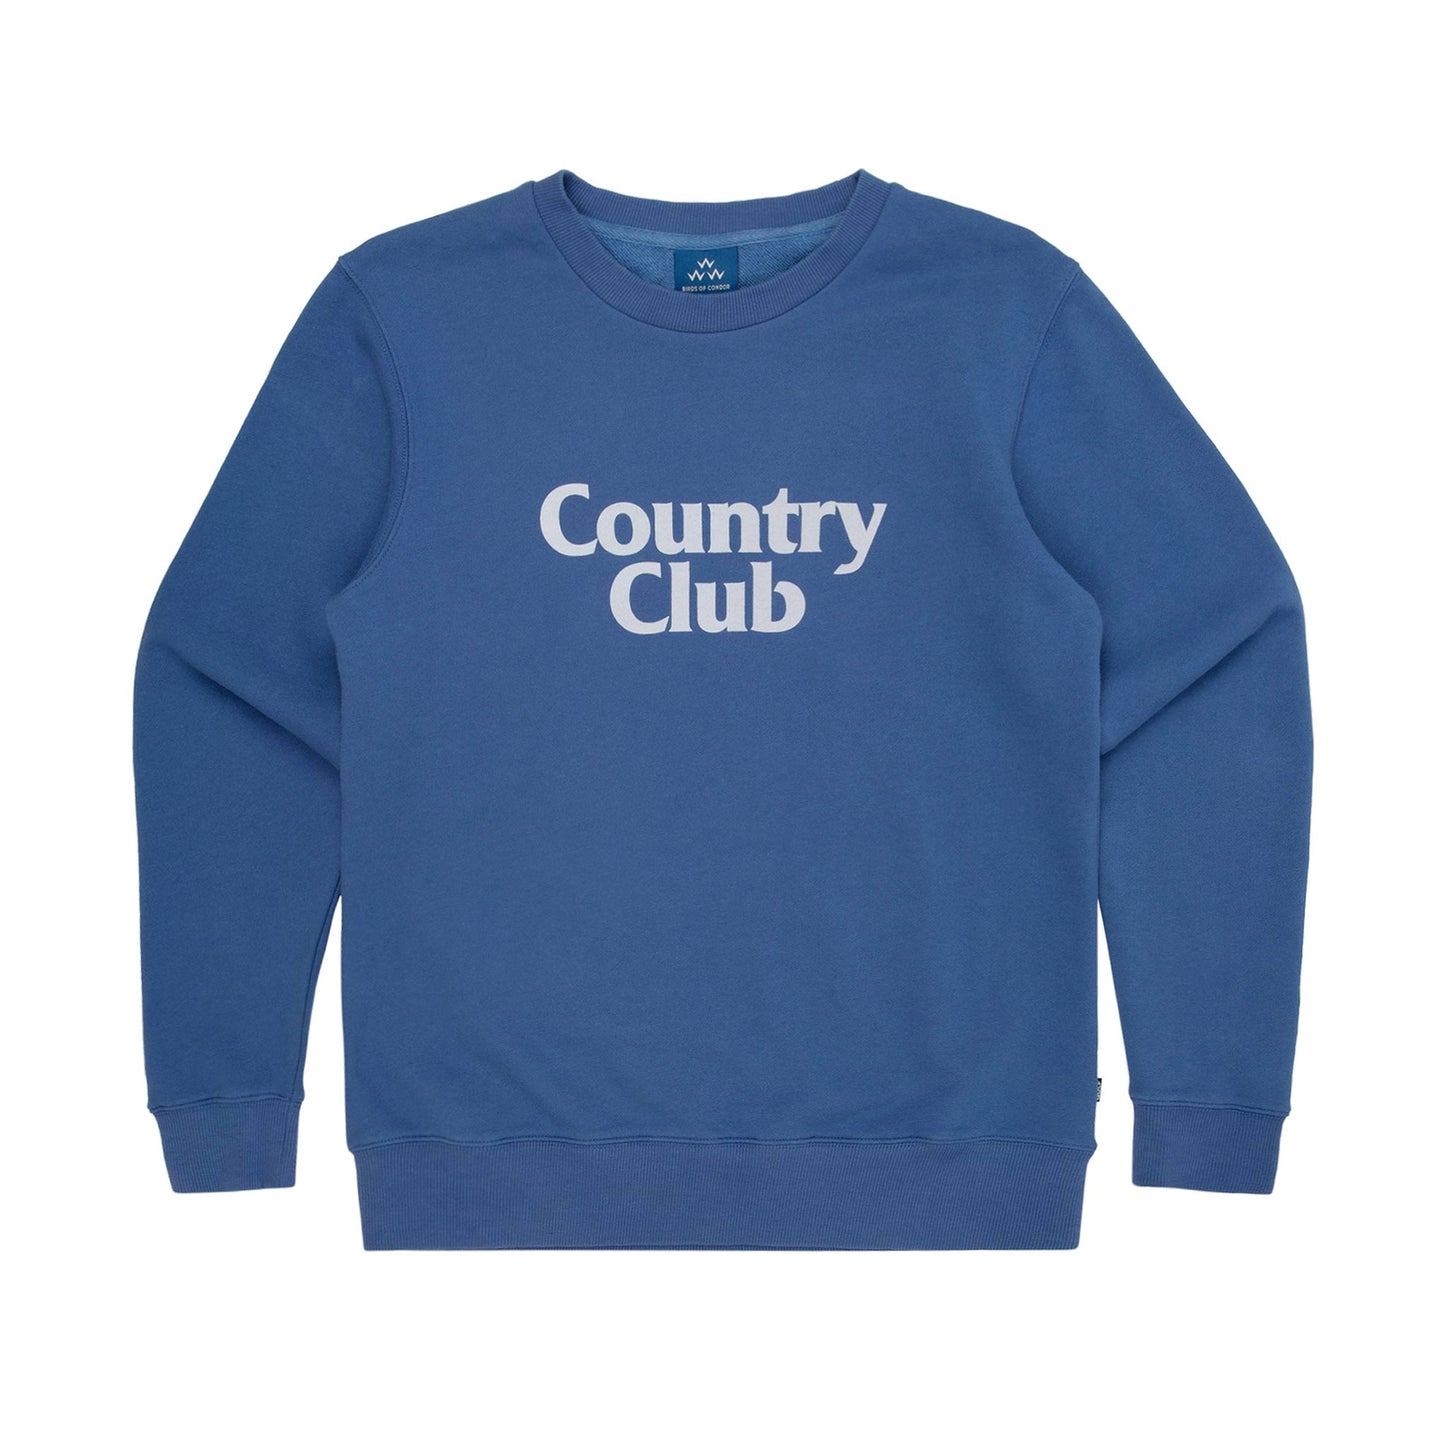 A vibrant blue crew neck with a classic white Country Club print, made from 100% Certified GOTS Organic French Terry Cotton for a premium hand feel and a regular fit. Ideal for your next rendezvous.